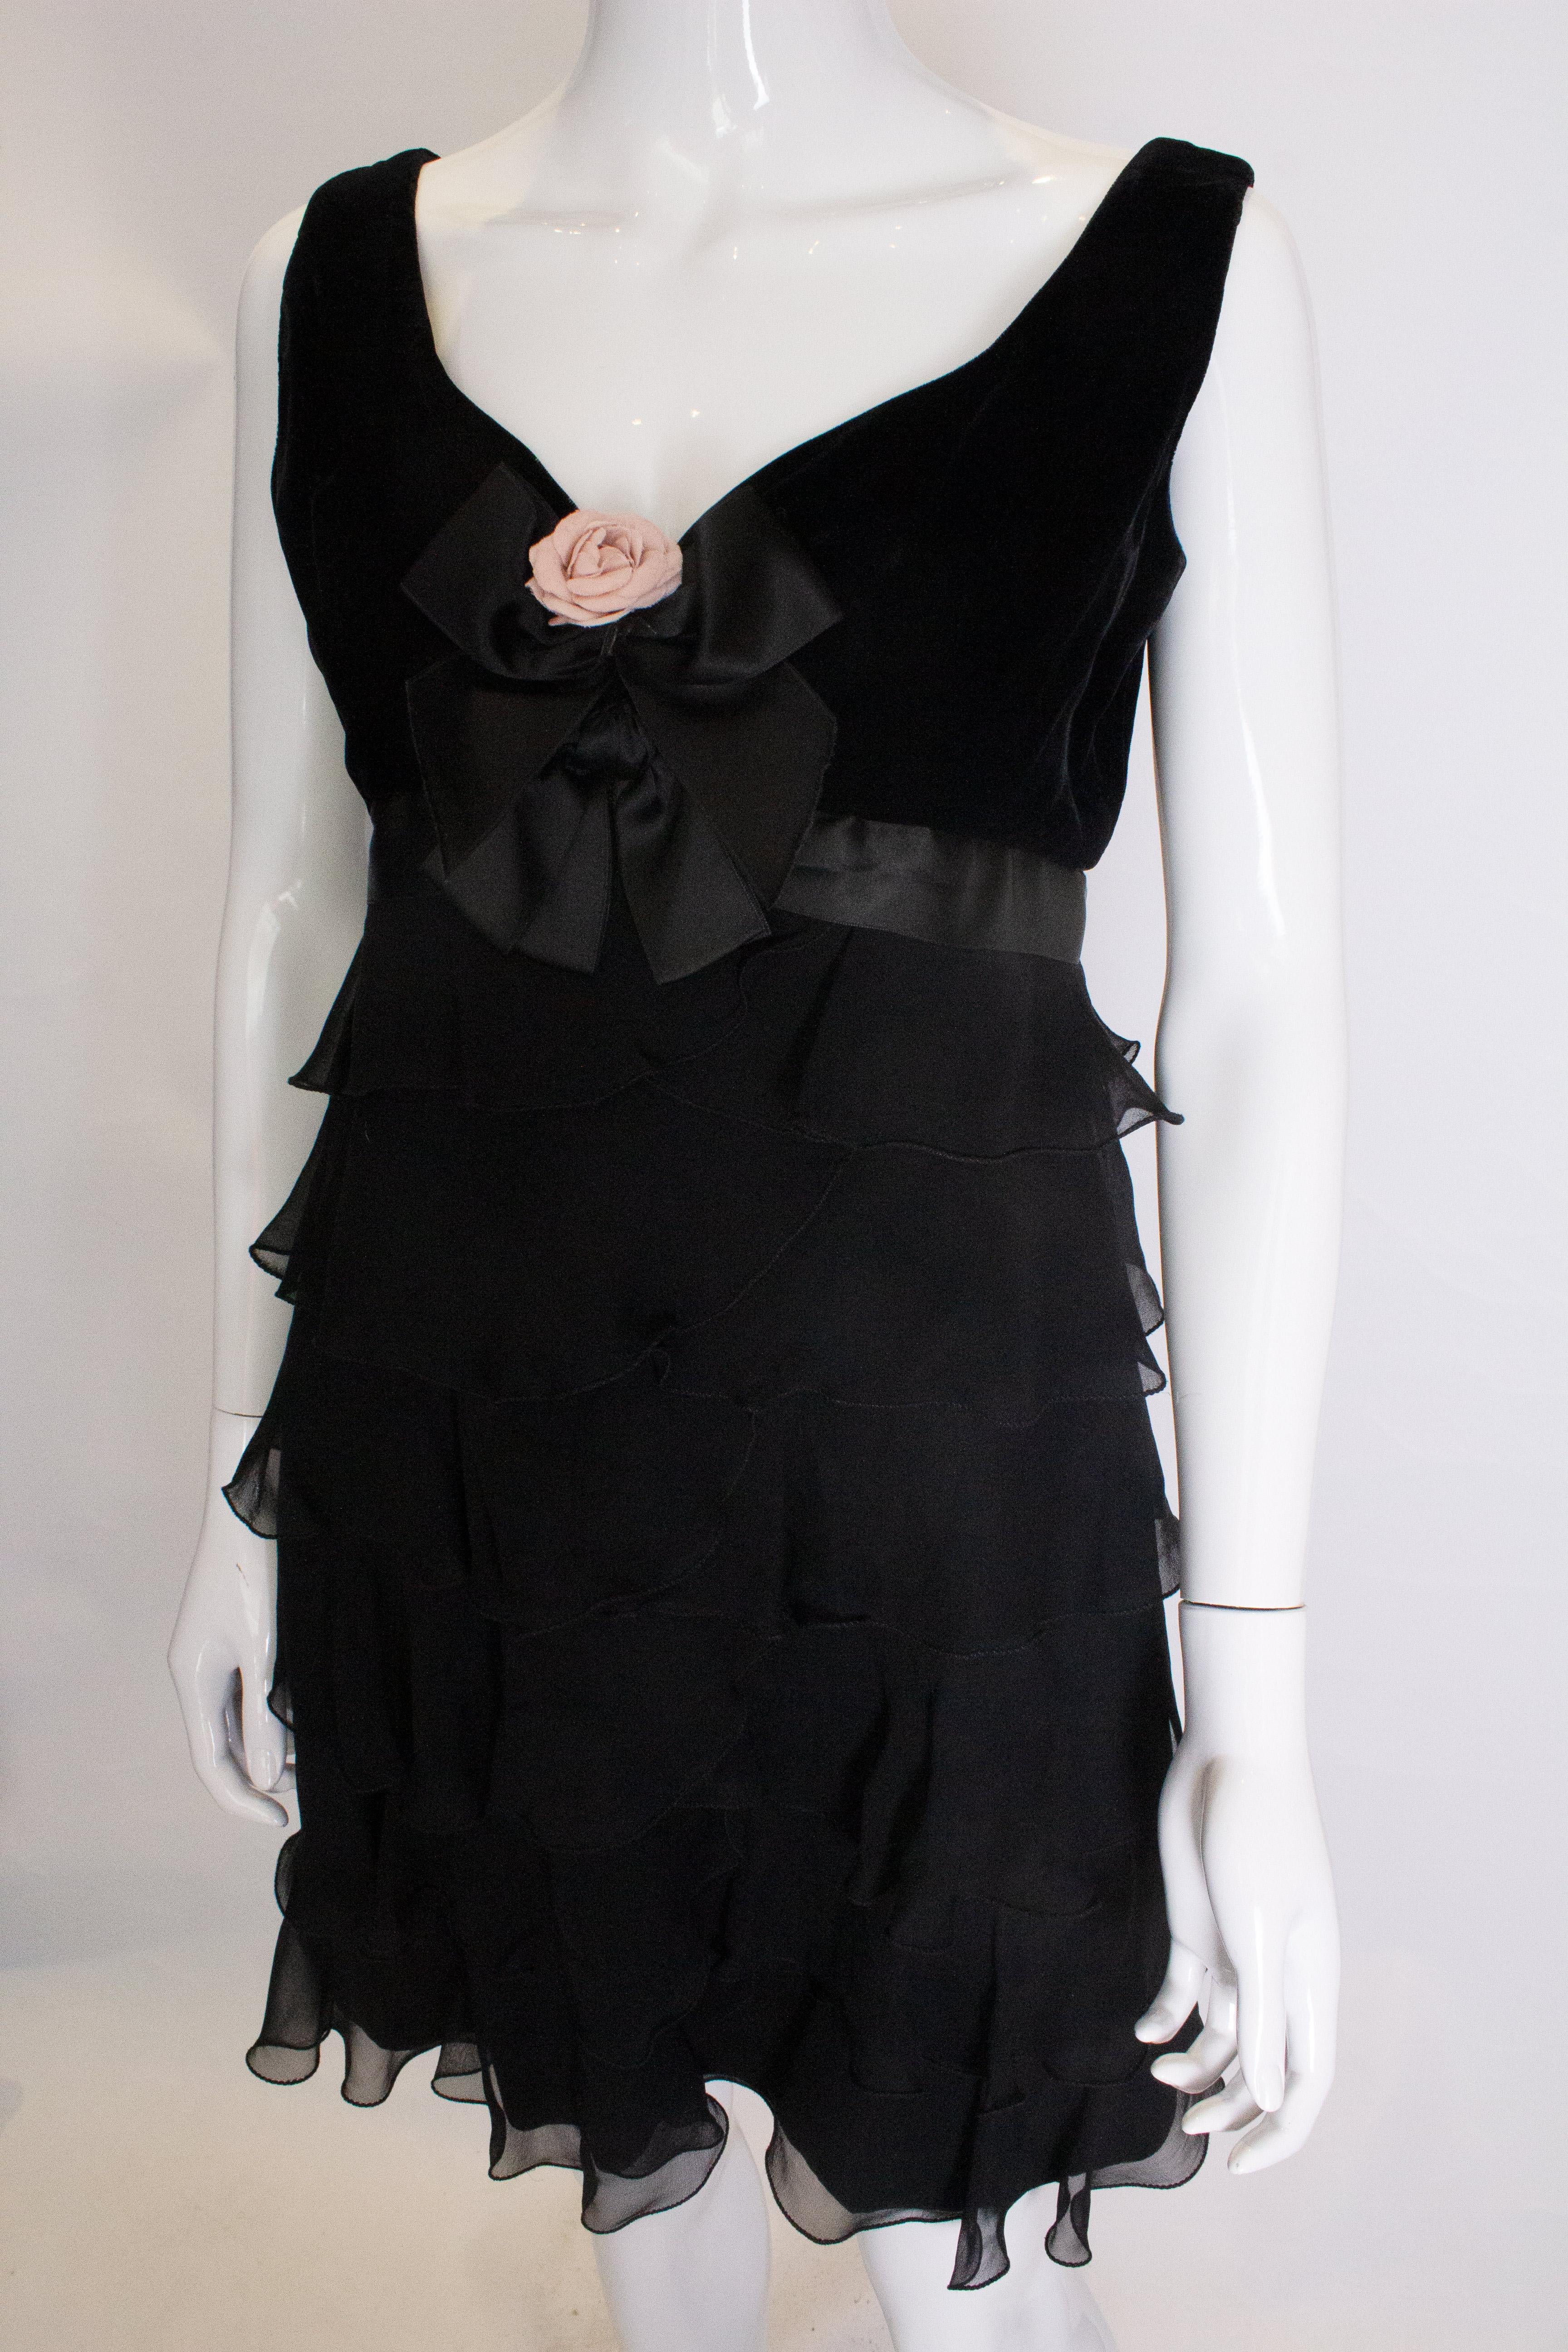 A chic black cocktail dress by Bellville Sassoon/Lorcan Mullany.The dress hasa v neckline and scoop backline  in silk velvet. The skirt area is layers of black silk over a black sheath. It has a central back zip.